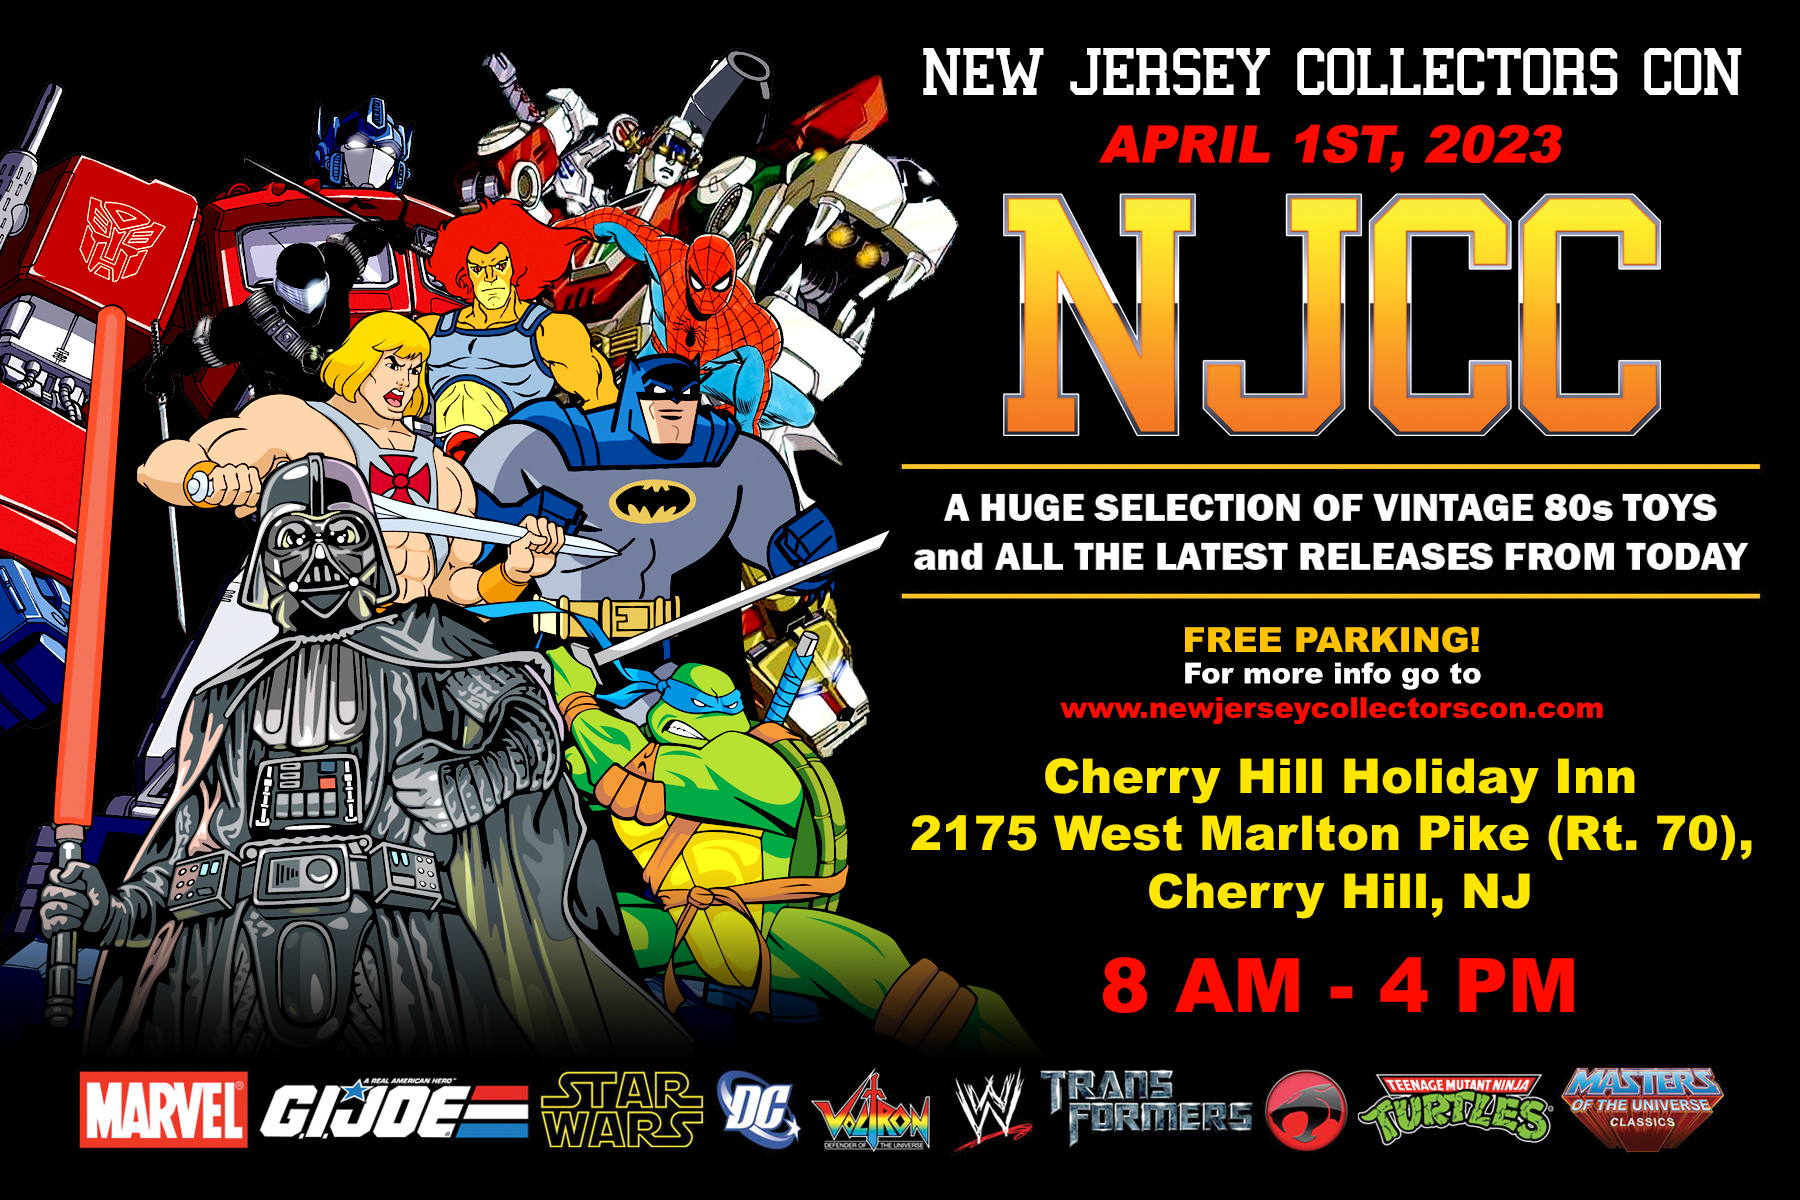 New Jersey Collectors Con Spring Show